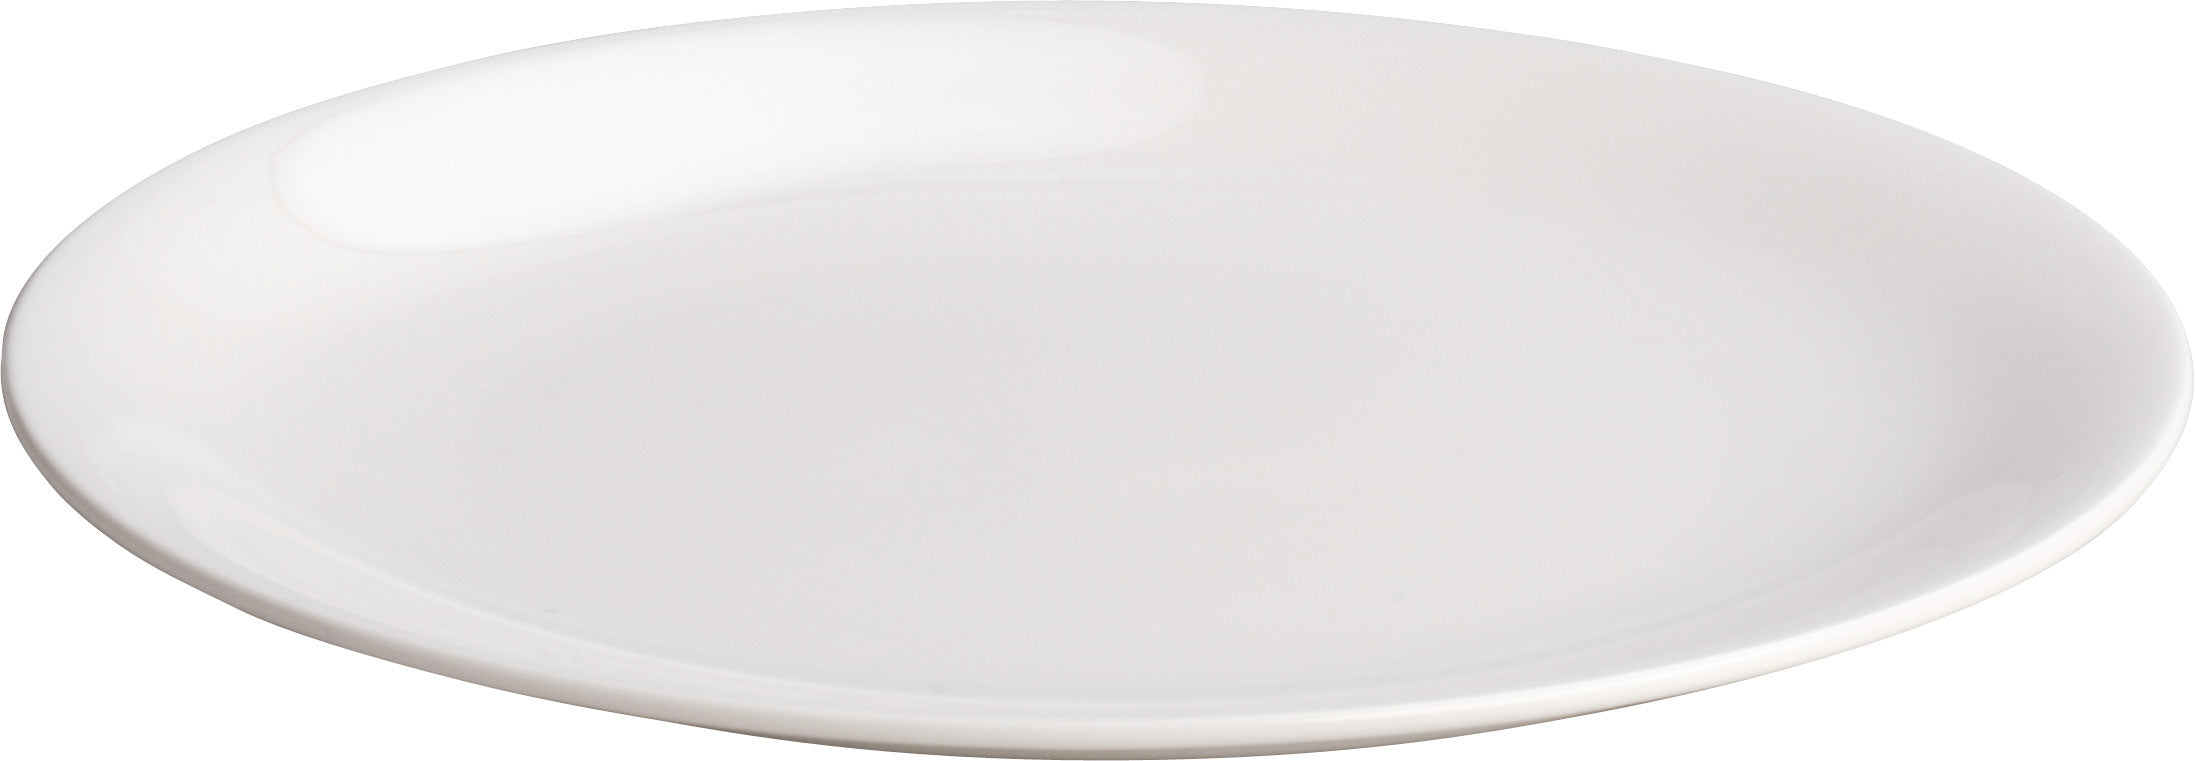 AGV29/5 All-Time Side plate in bone china 20 cm